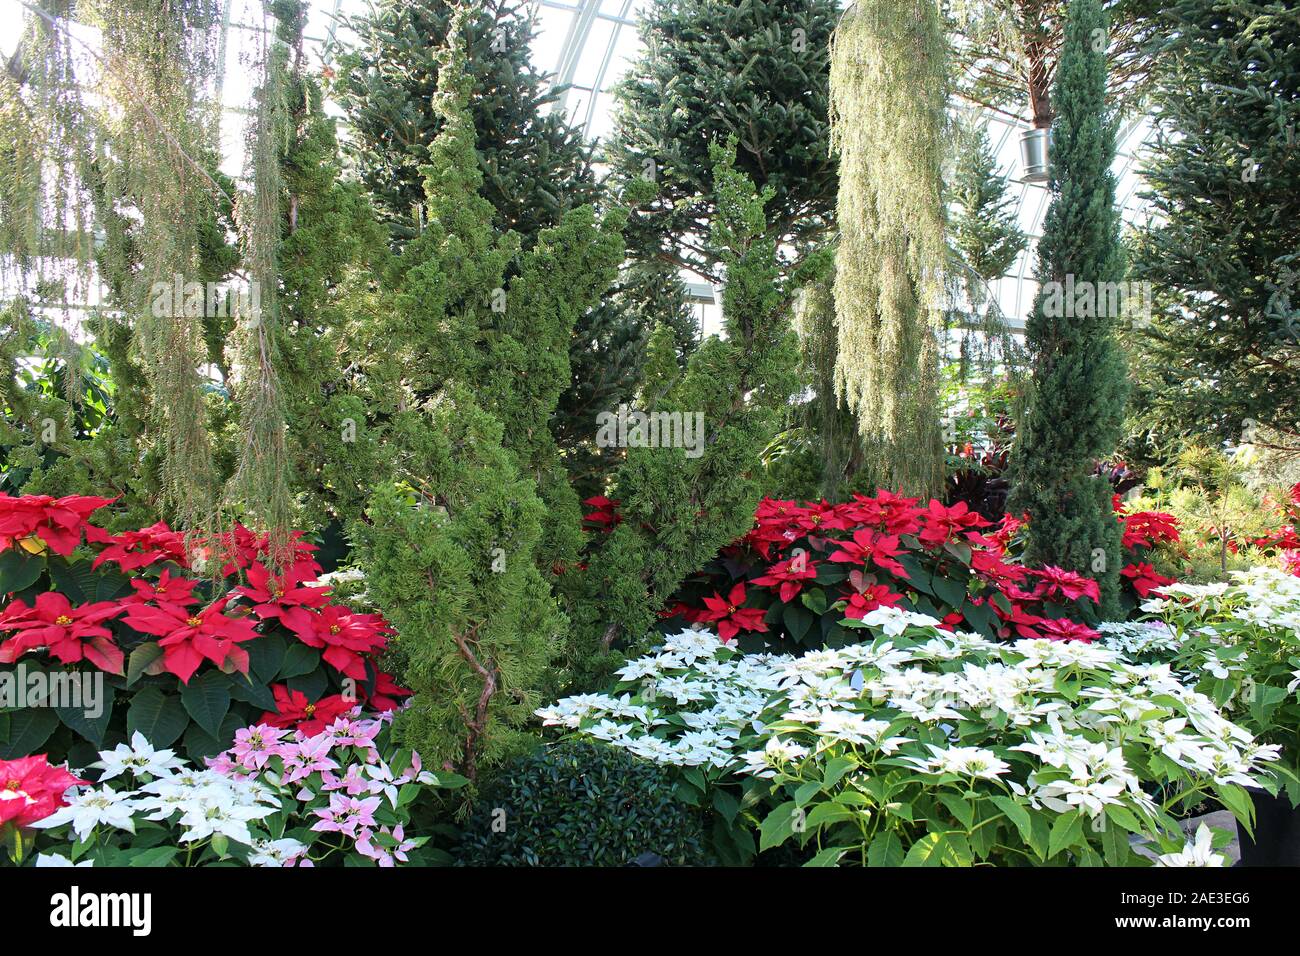 A holiday garden display filled with red, white and pink poinsettias, evergreen trees, Juniper and weeping cedar Stock Photo